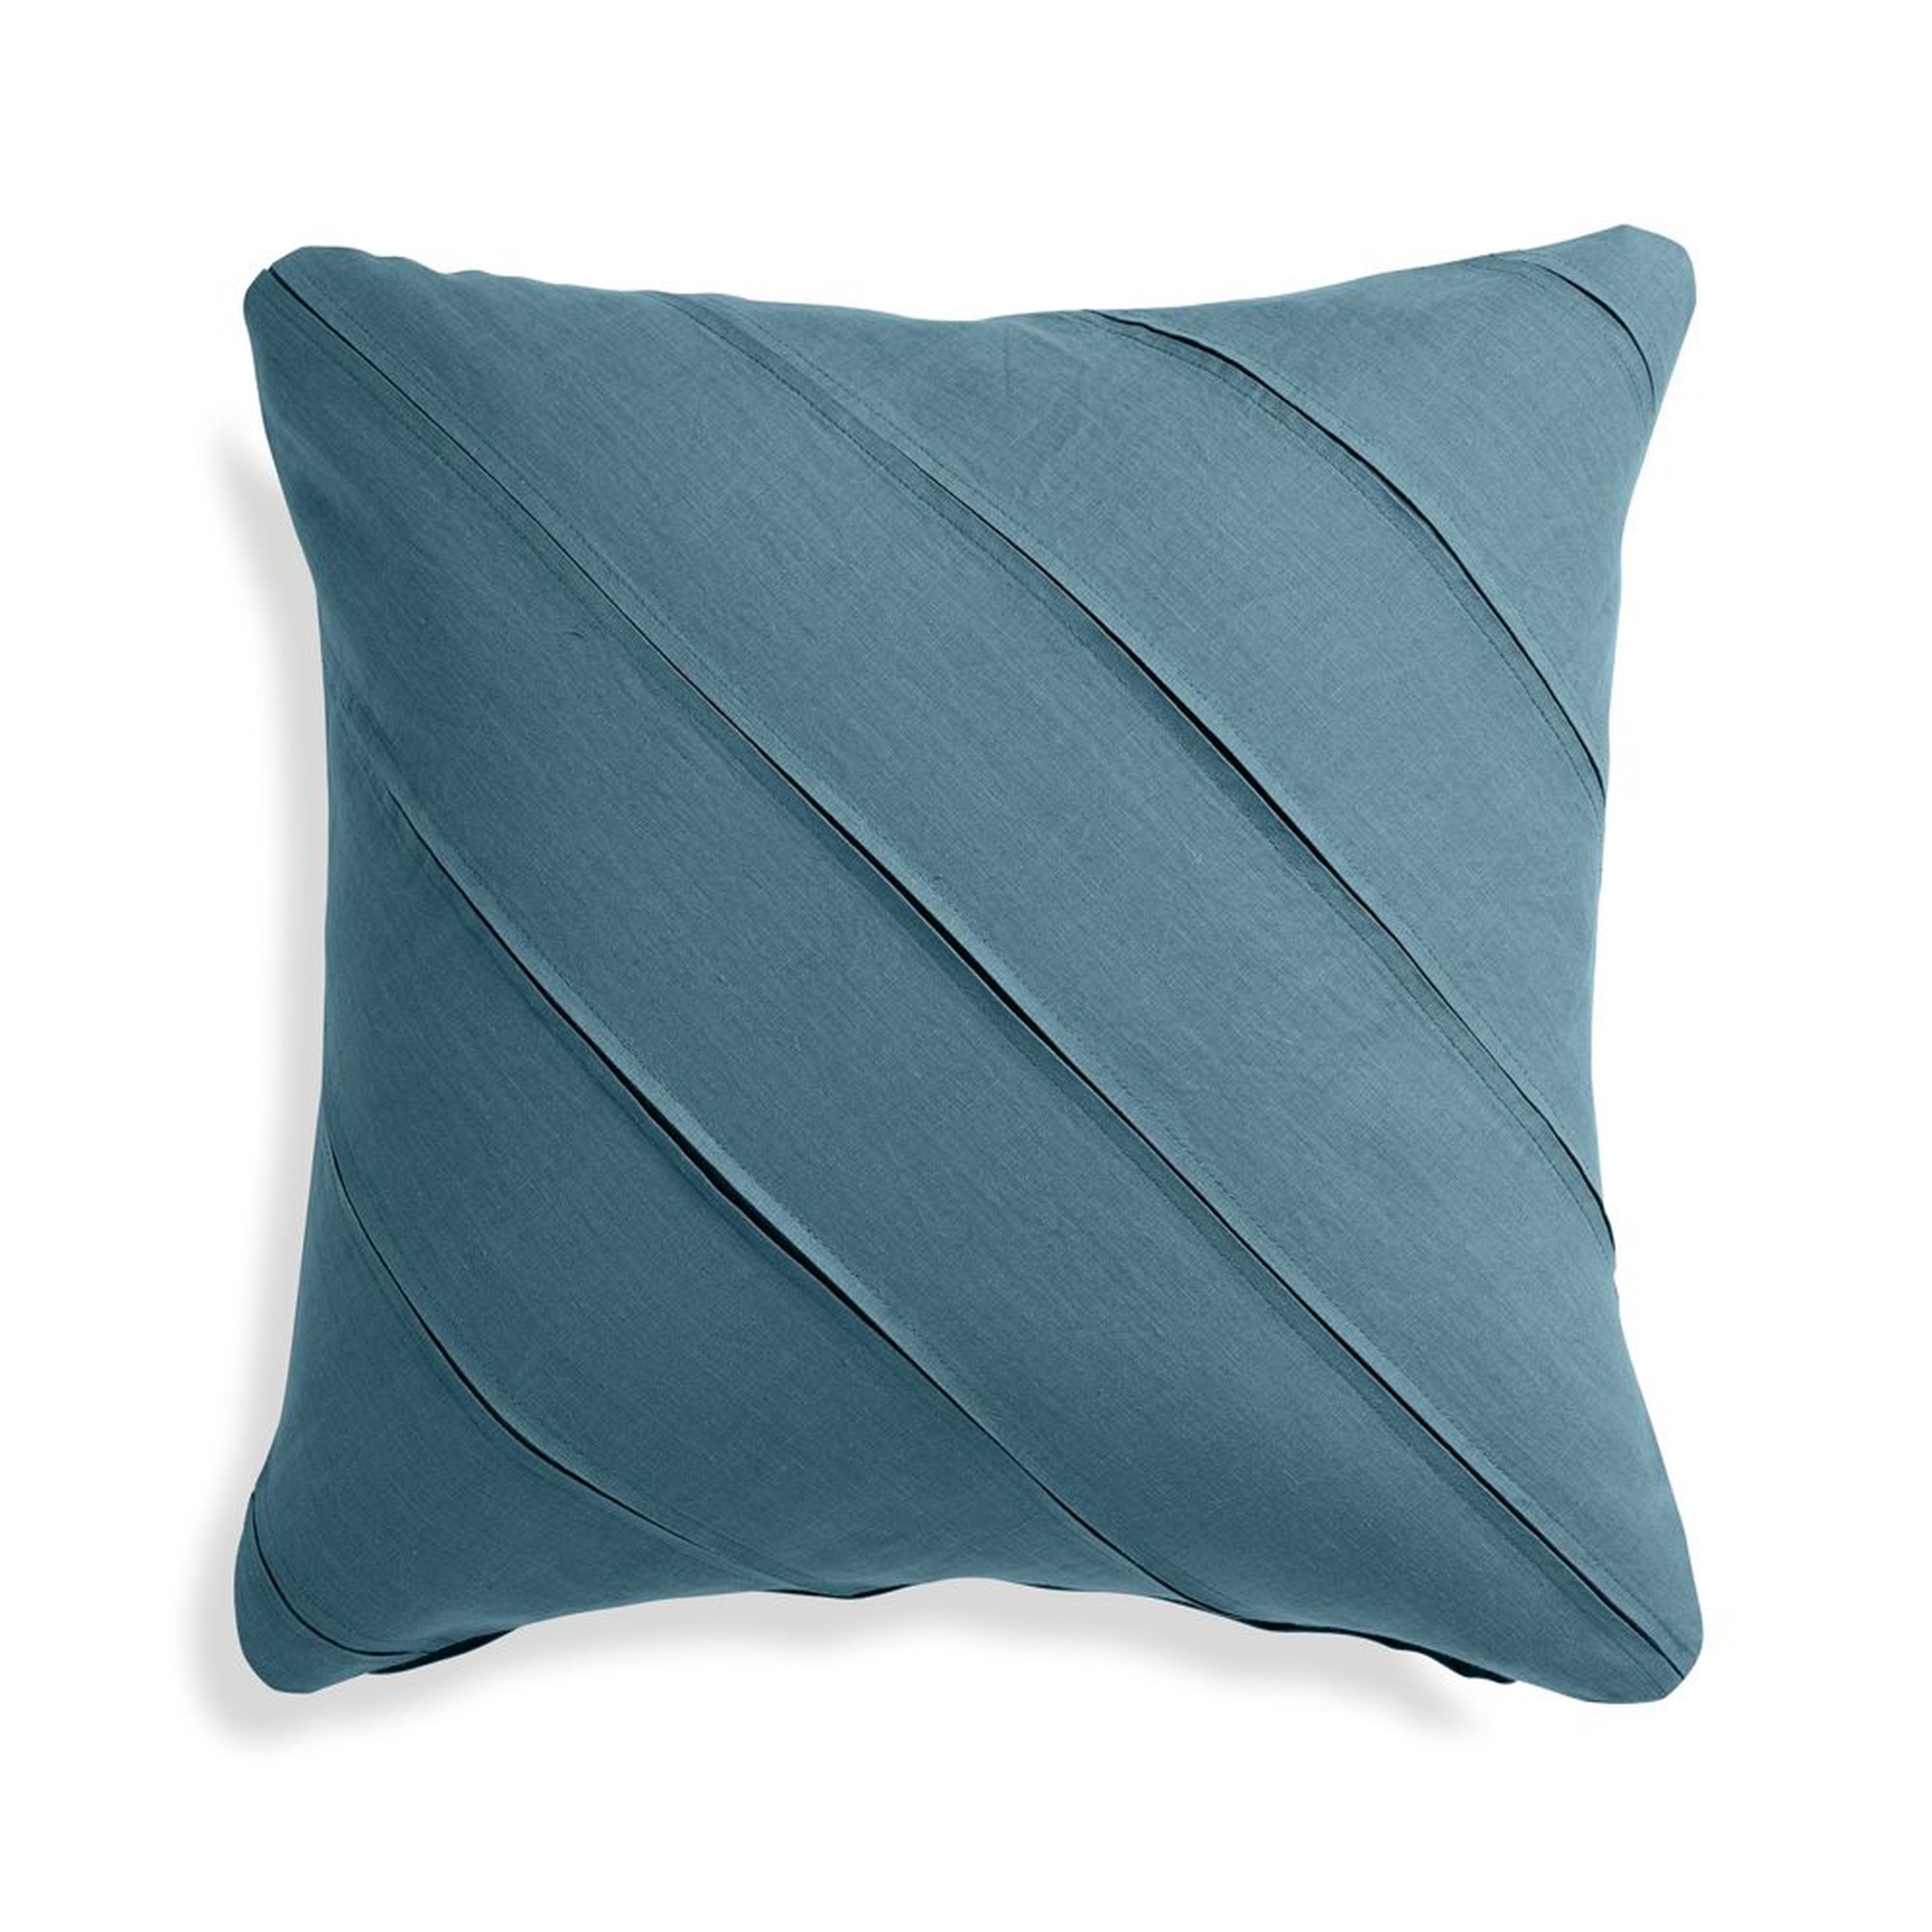 Theta Teal Linen Pillow Cover 20" - Crate and Barrel